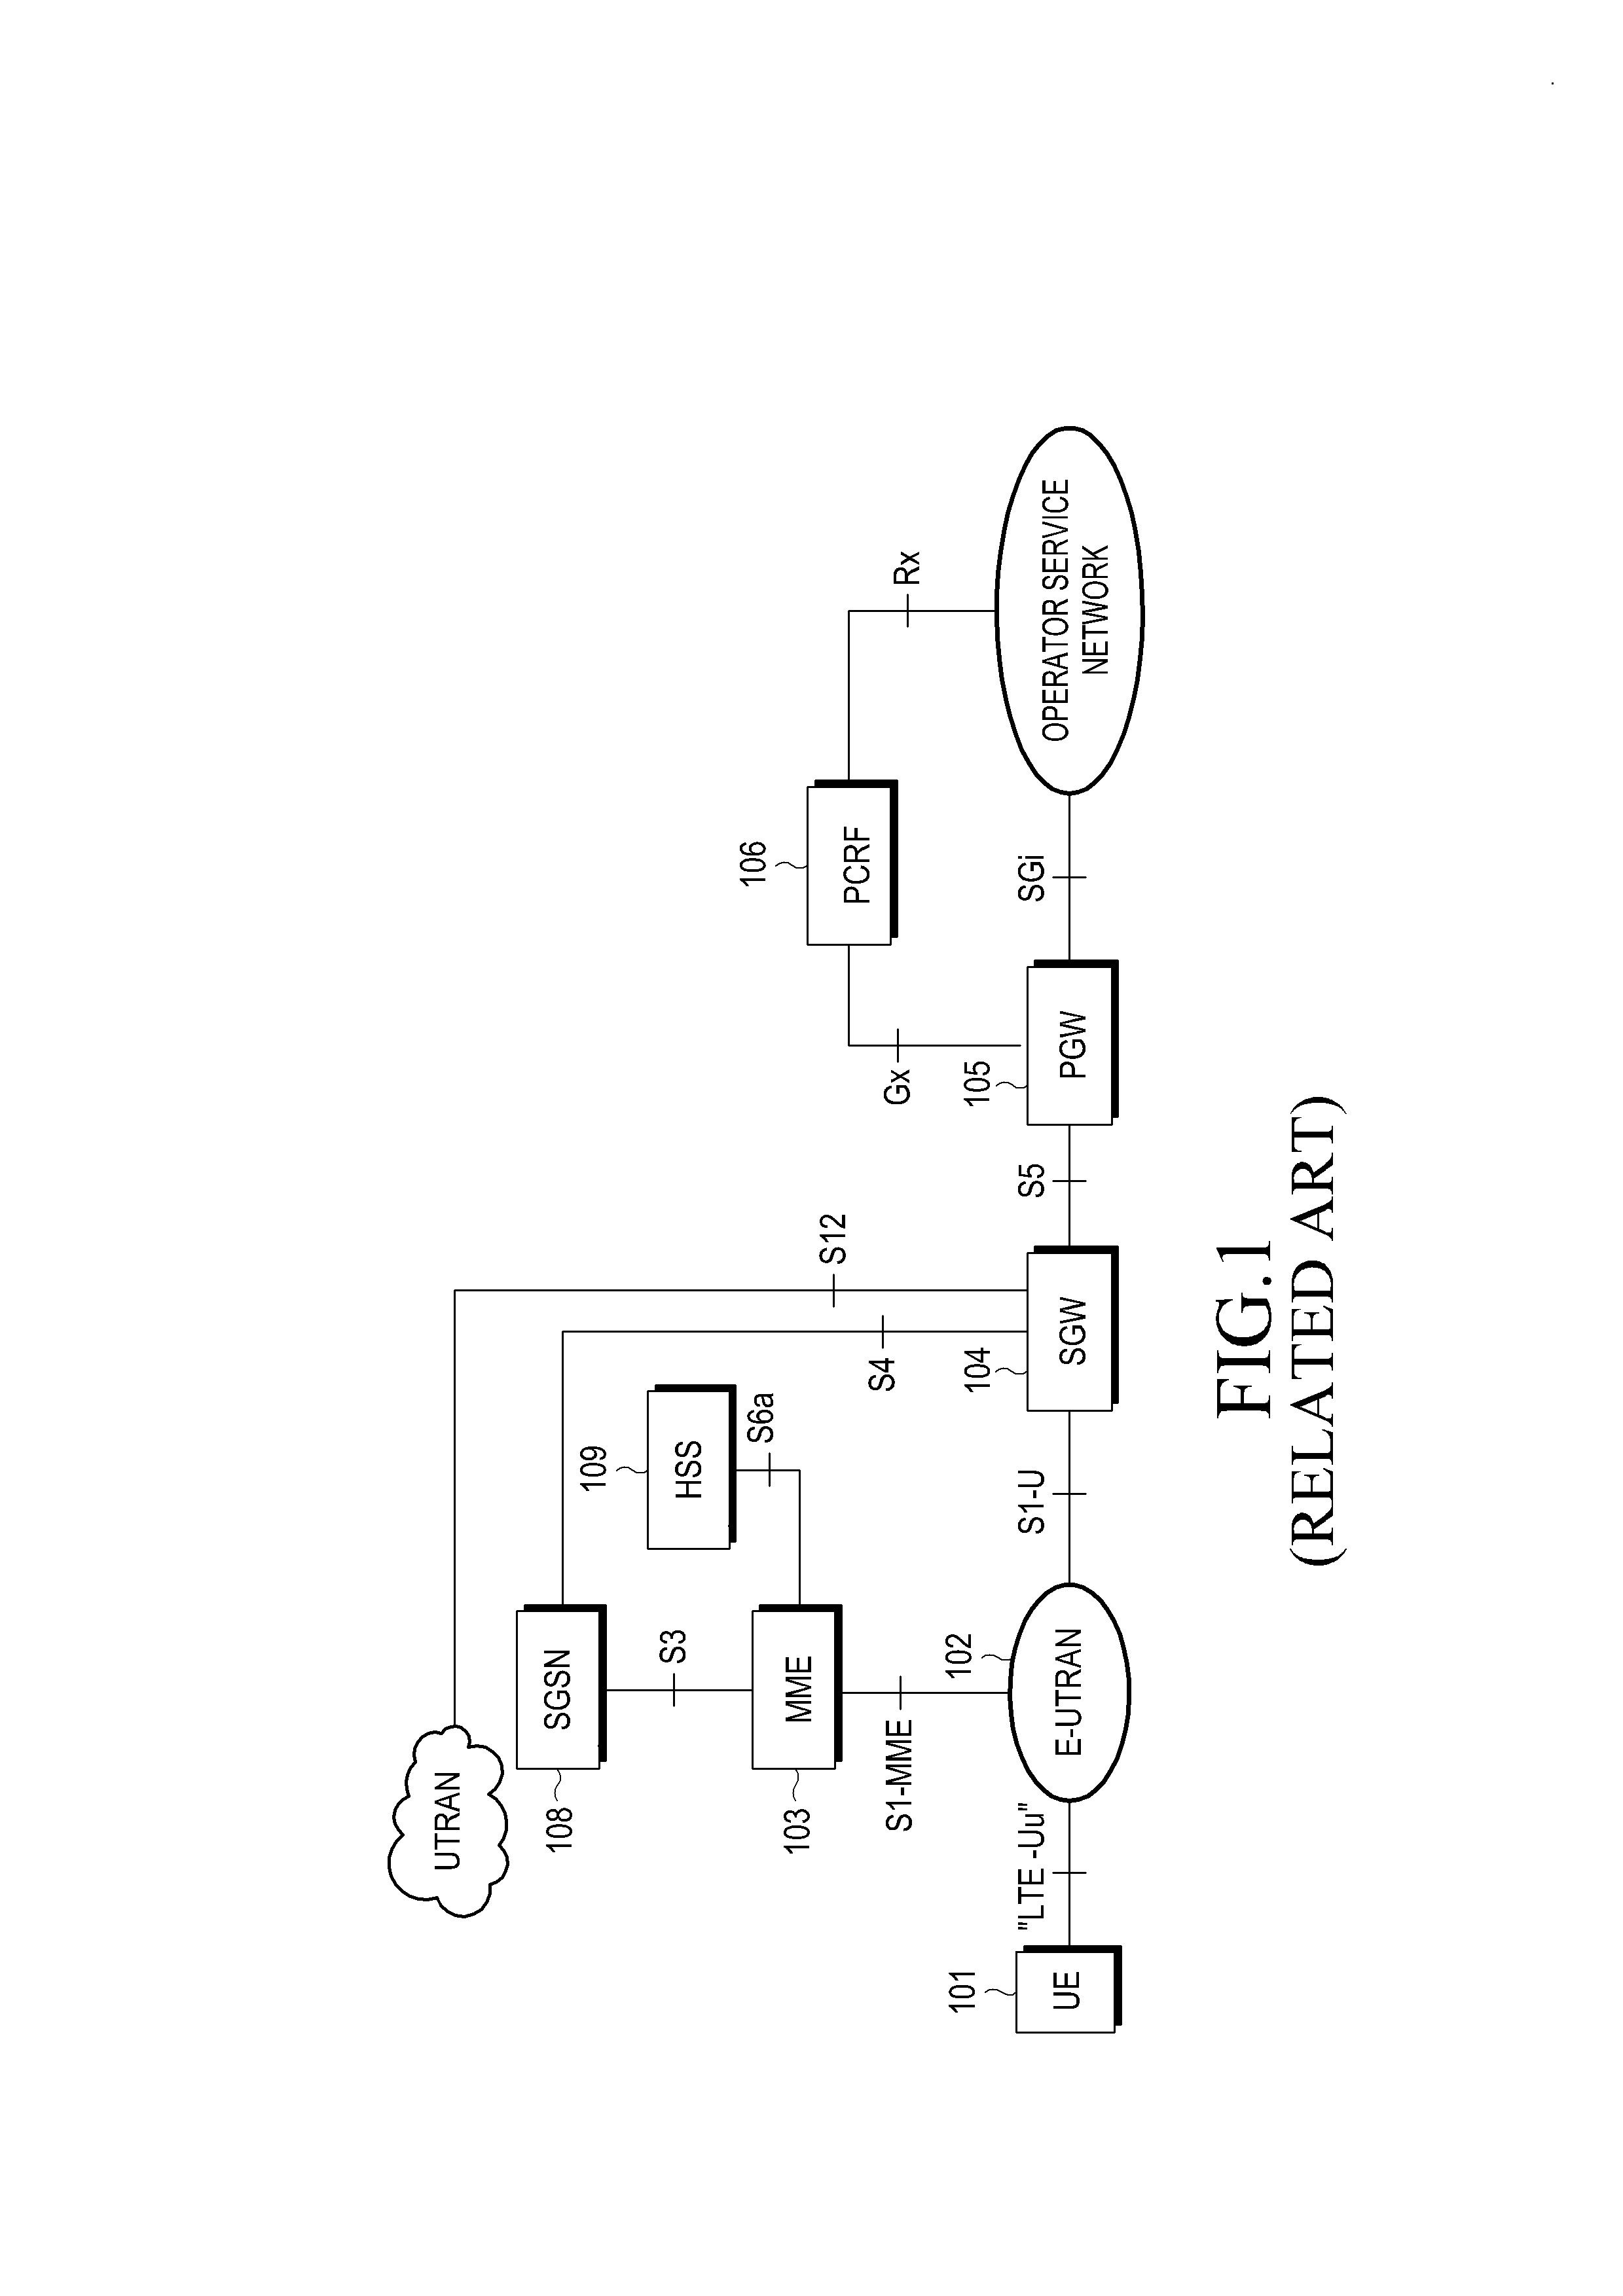 Method of mdt continuous measurement and reporting under multiple plmns